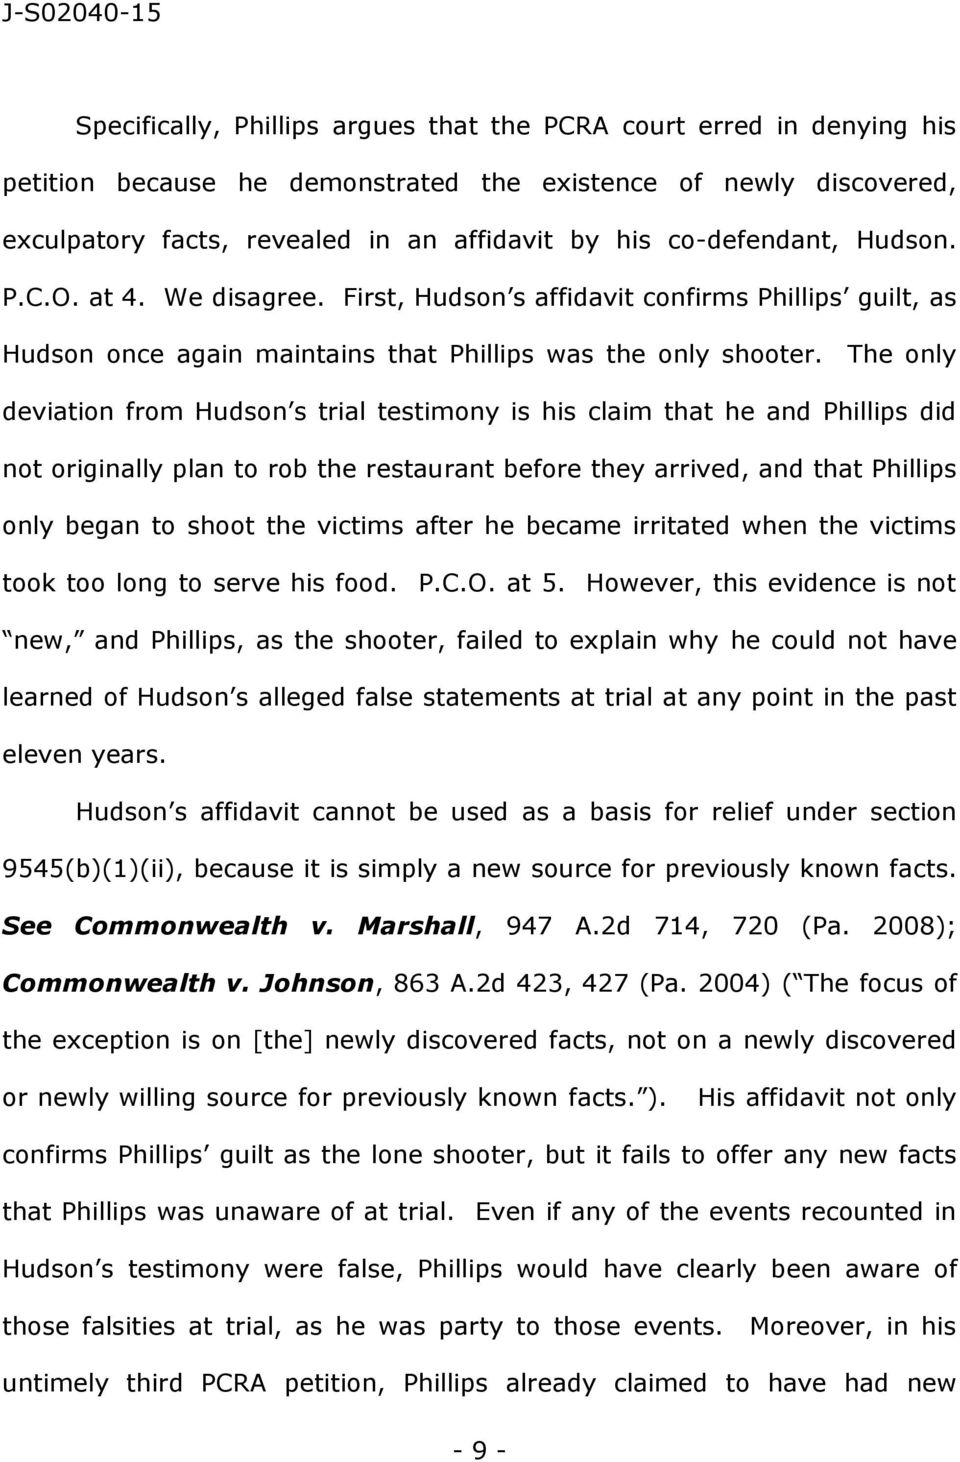 The only deviation from Hudson s trial testimony is his claim that he and Phillips did not originally plan to rob the restaurant before they arrived, and that Phillips only began to shoot the victims